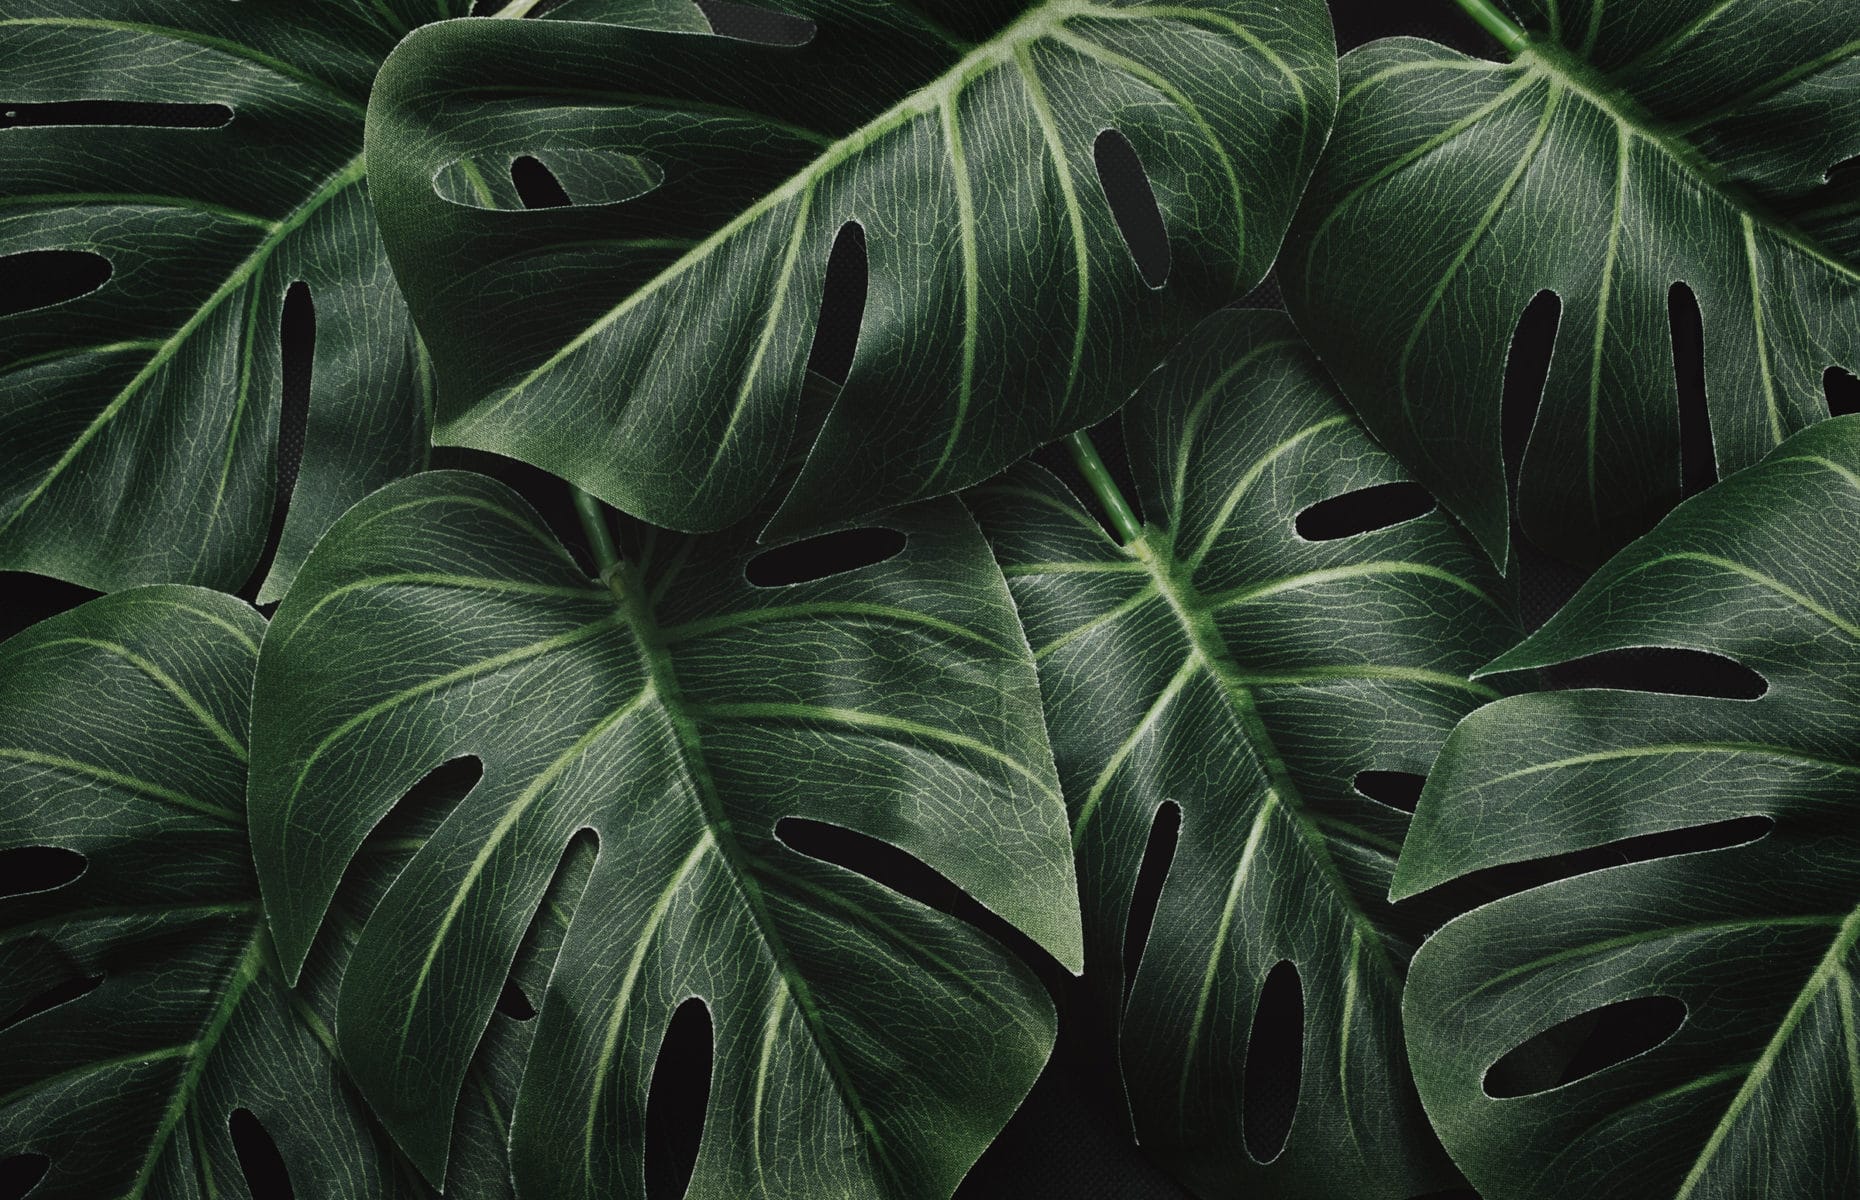 Night mystical dramatic jungle and monstera leaves and layout pattern in tropical moody forest